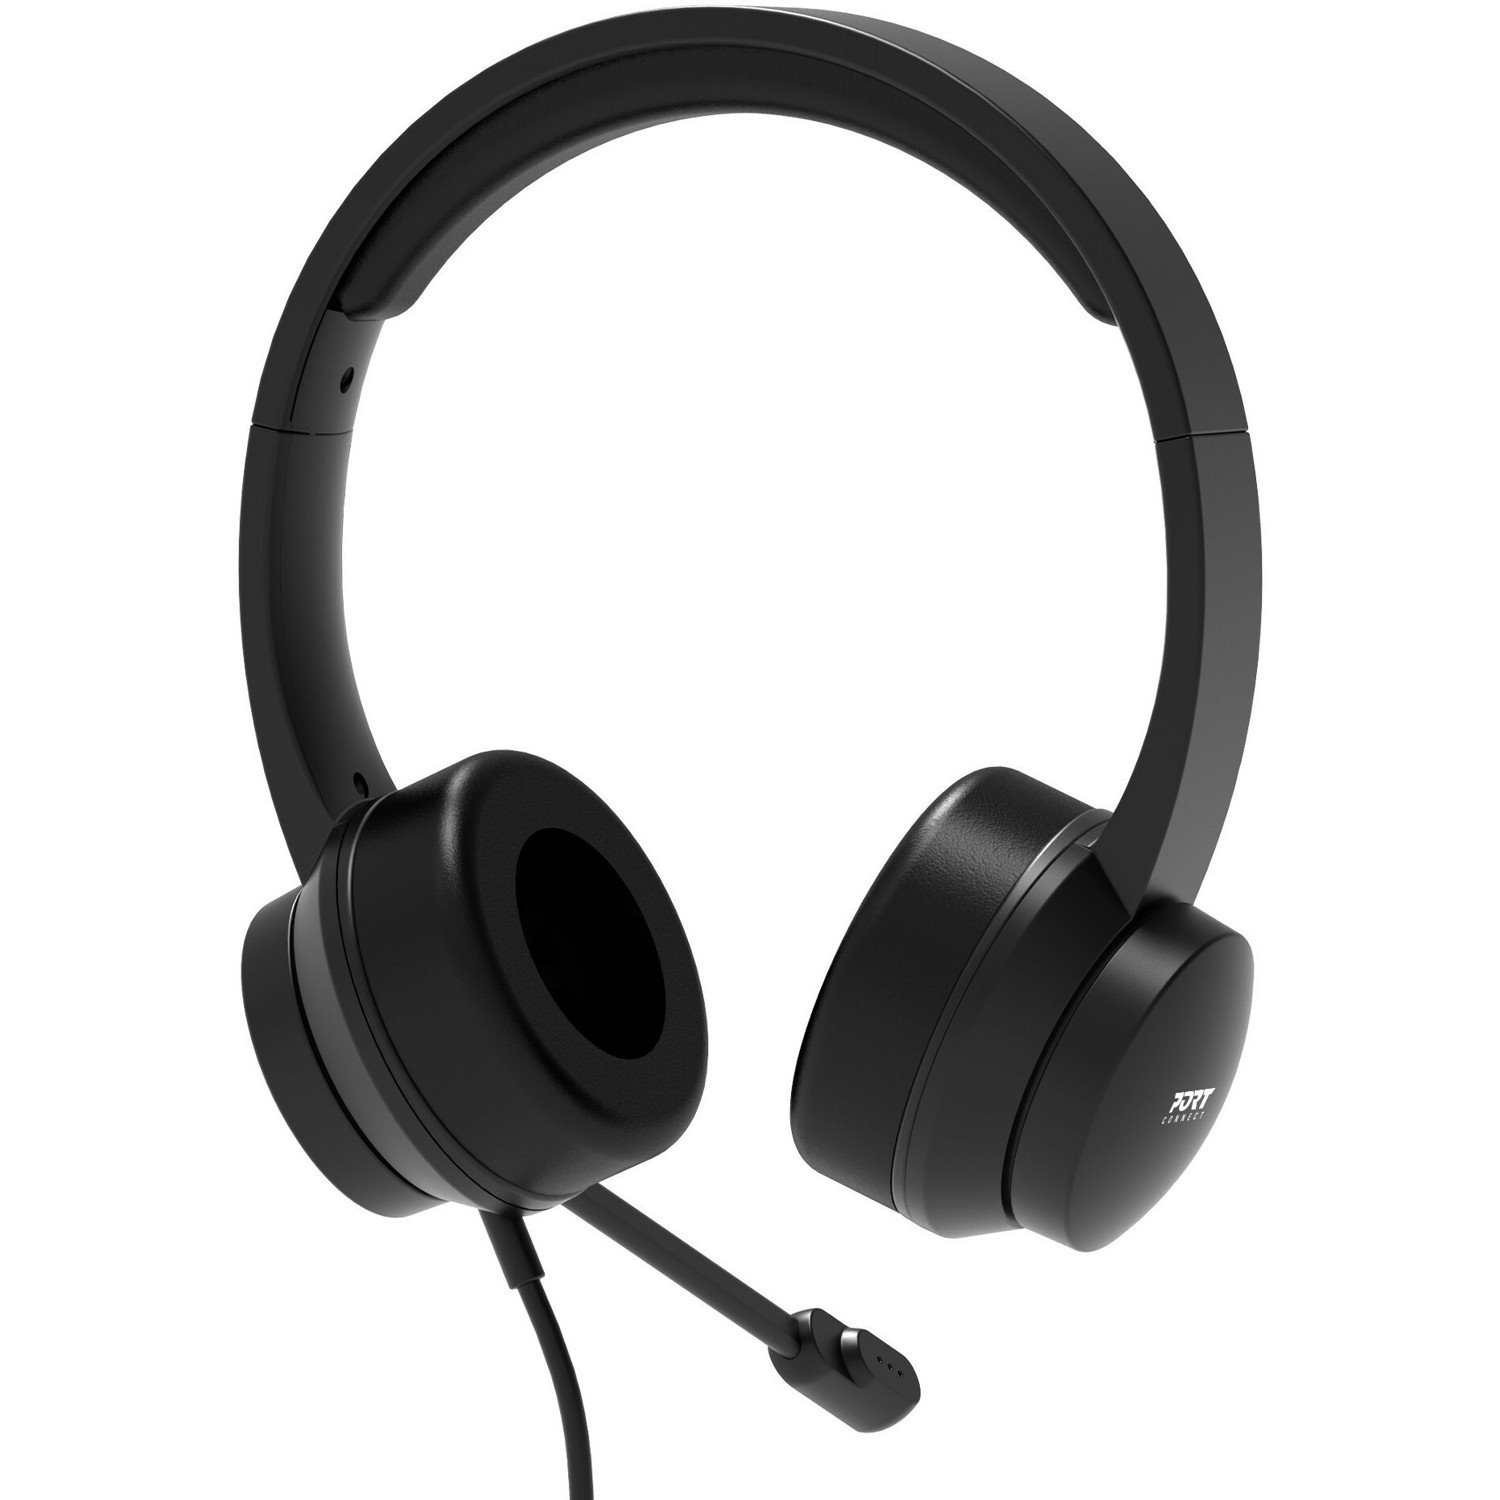 Port Comfort Wired Over-the-head Stereo Headset